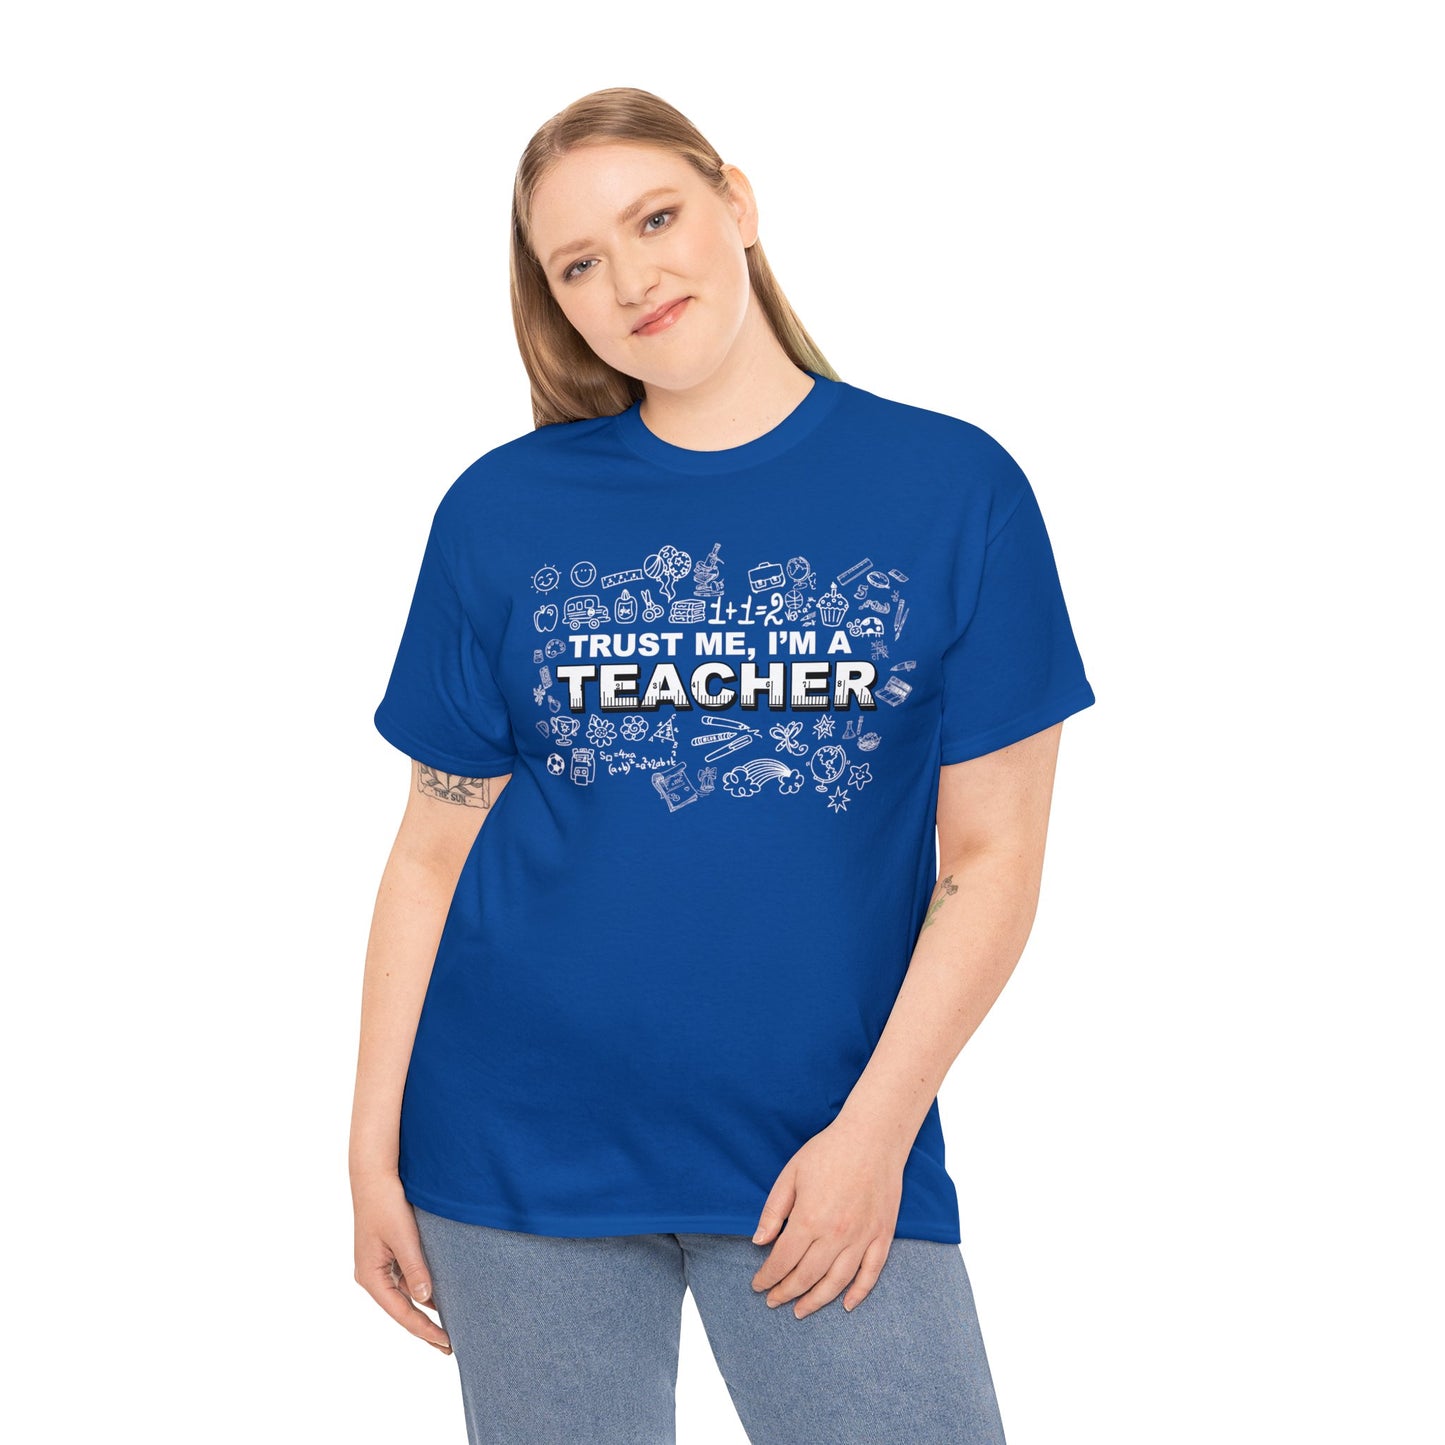 Trust Me, I'm a Teacher T-Shirts - Perfect Apparel for Educators and Trendsetters!